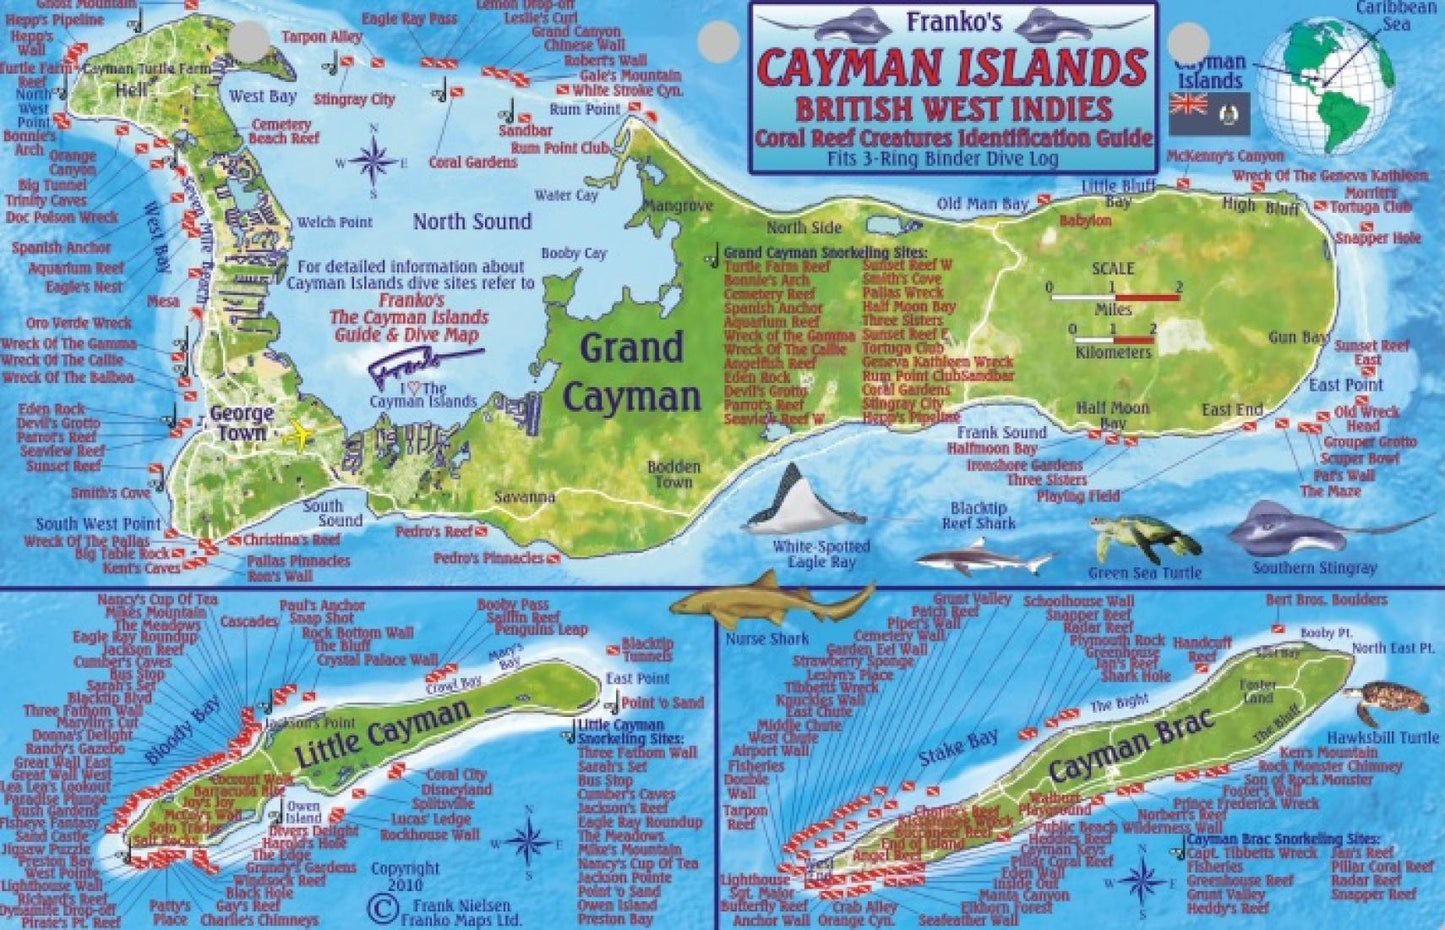 Franko's Cayman Islands : British West Indies : coral reef creatures identification guide : fits 3-ring binder dive log